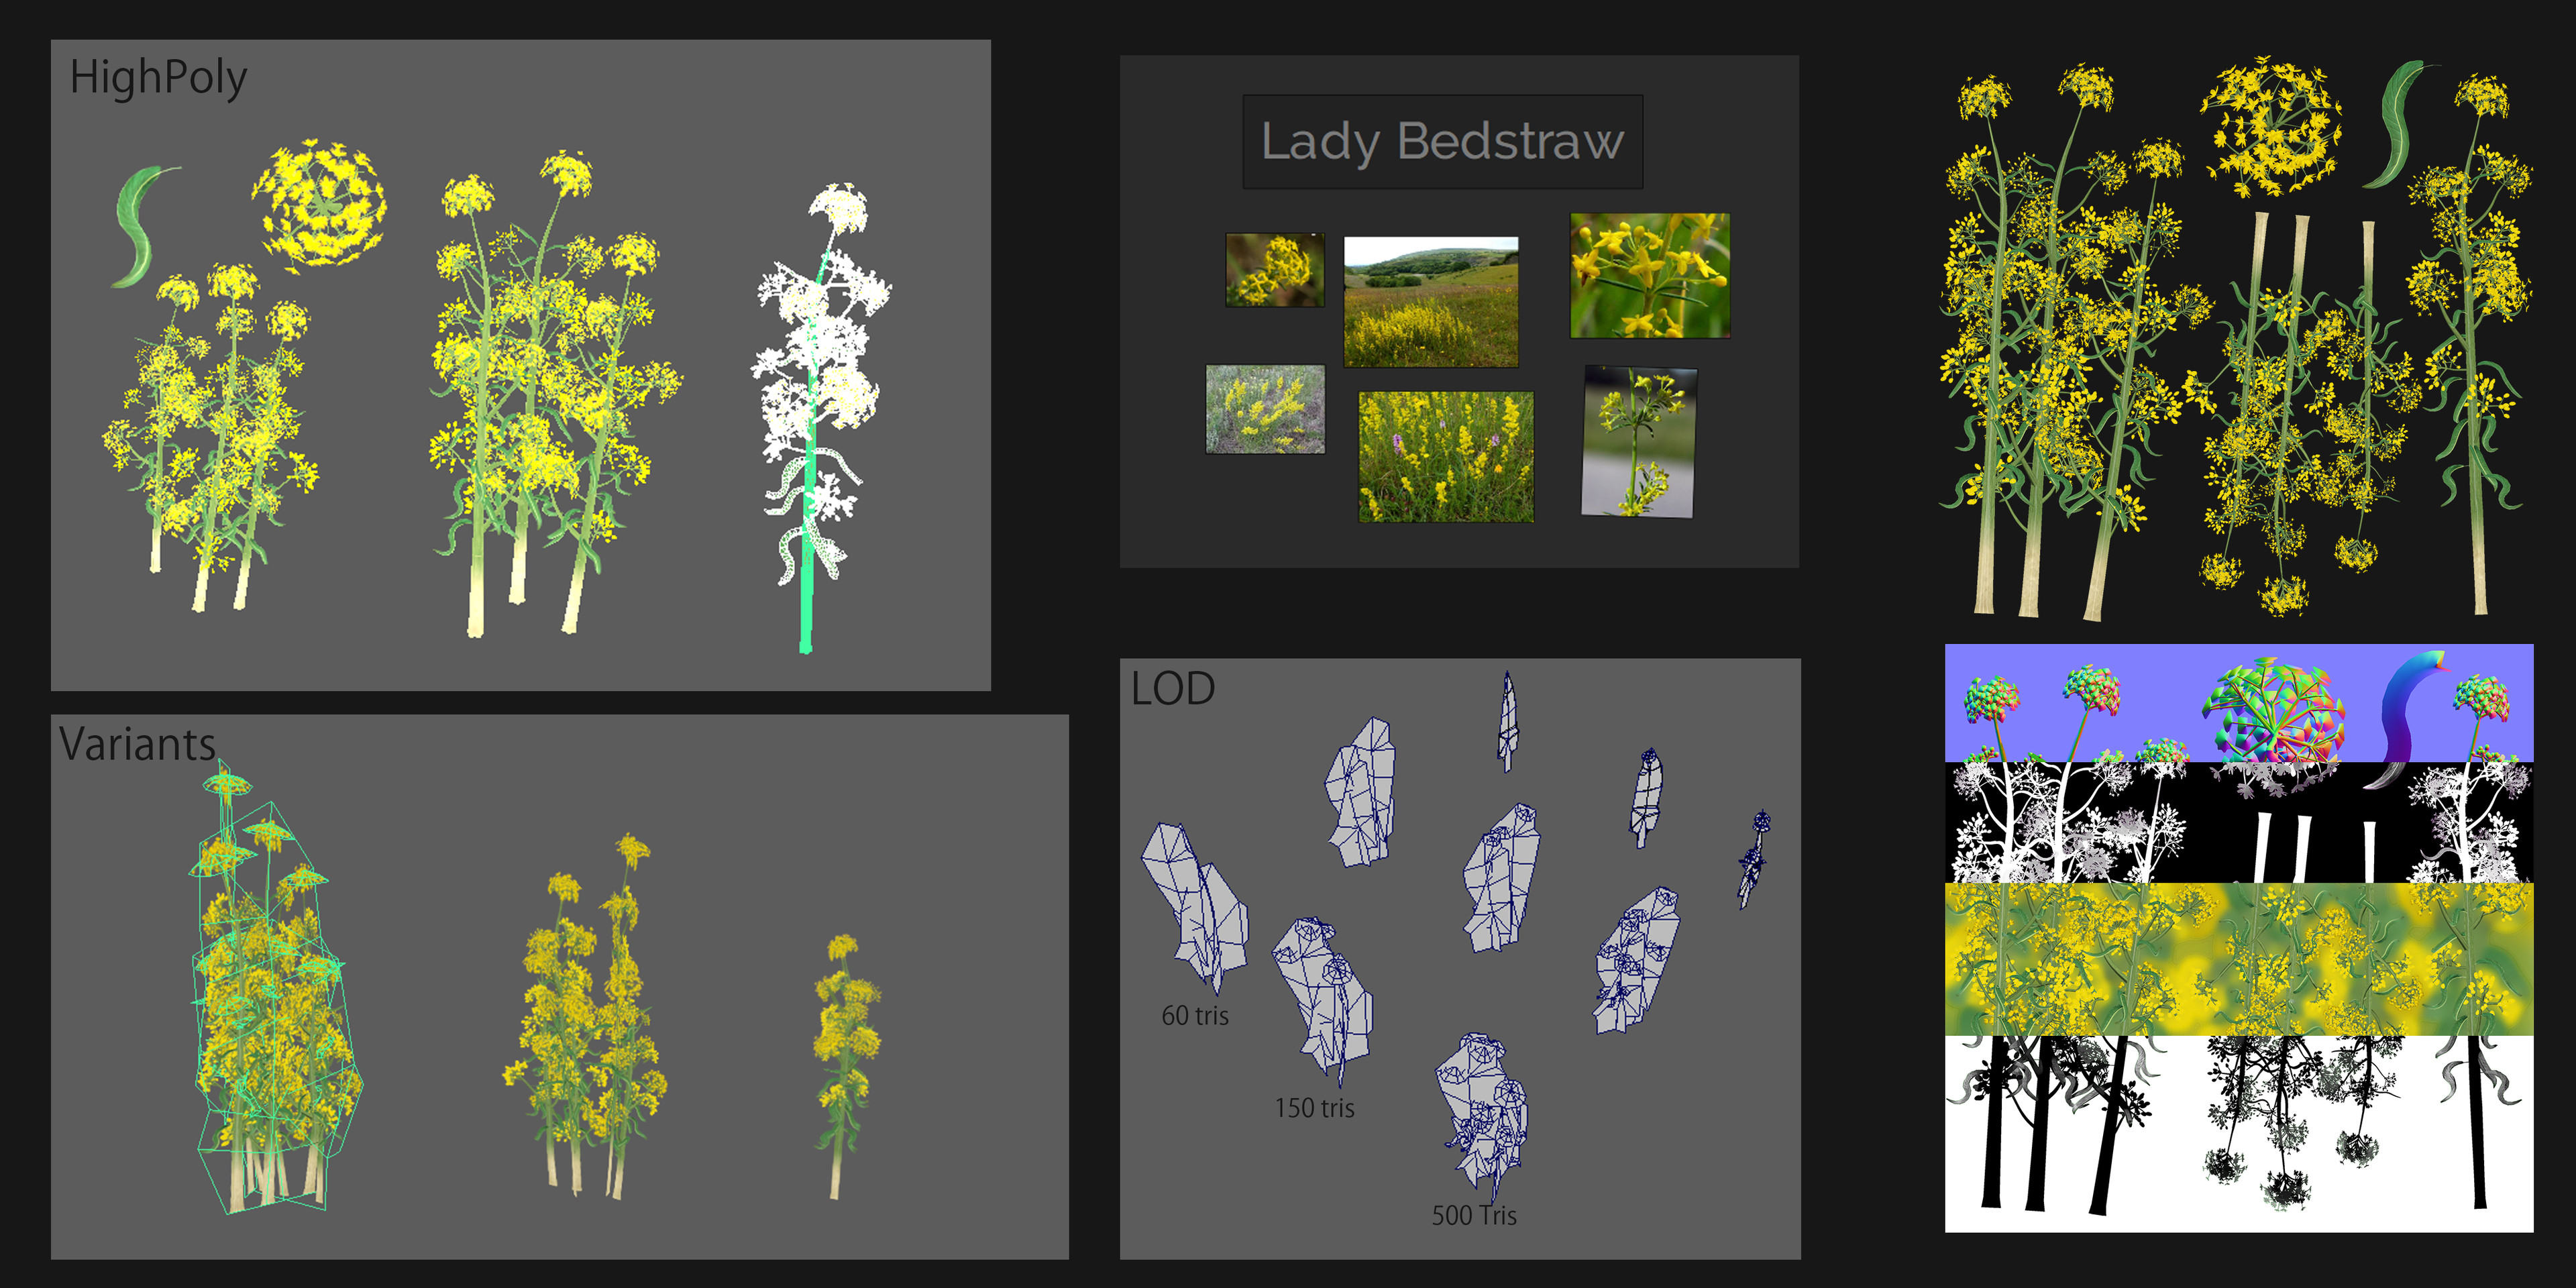 The process of making Lady's Bedstraw Flower: 
Highpoly rendered on a plane with Substance designer.
from there I processed it in photoshop and to make Normals, Roughness, Albedo and Transmitance map.
I edited the texture a bit later in Substance Painter
